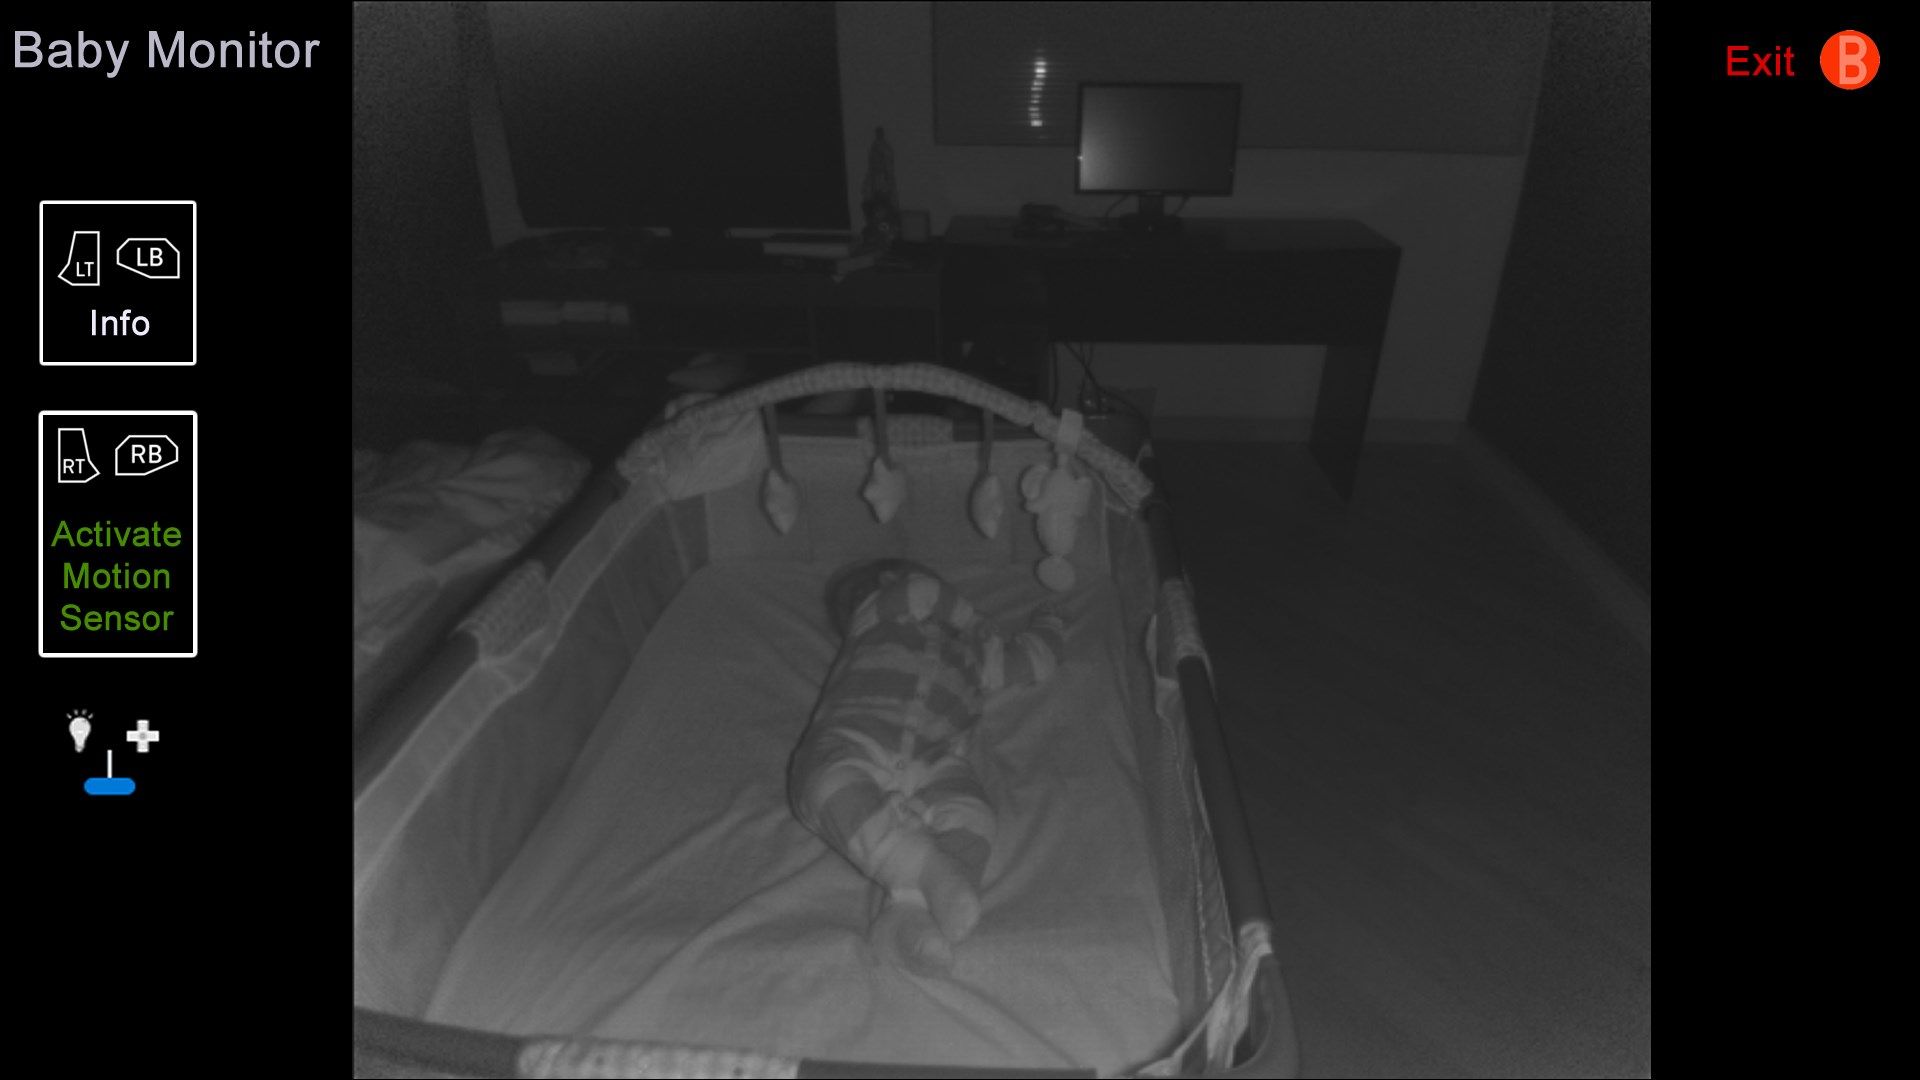 High quality Infrared (Night Vision) Video. (This is how it looks in the Xbox One)